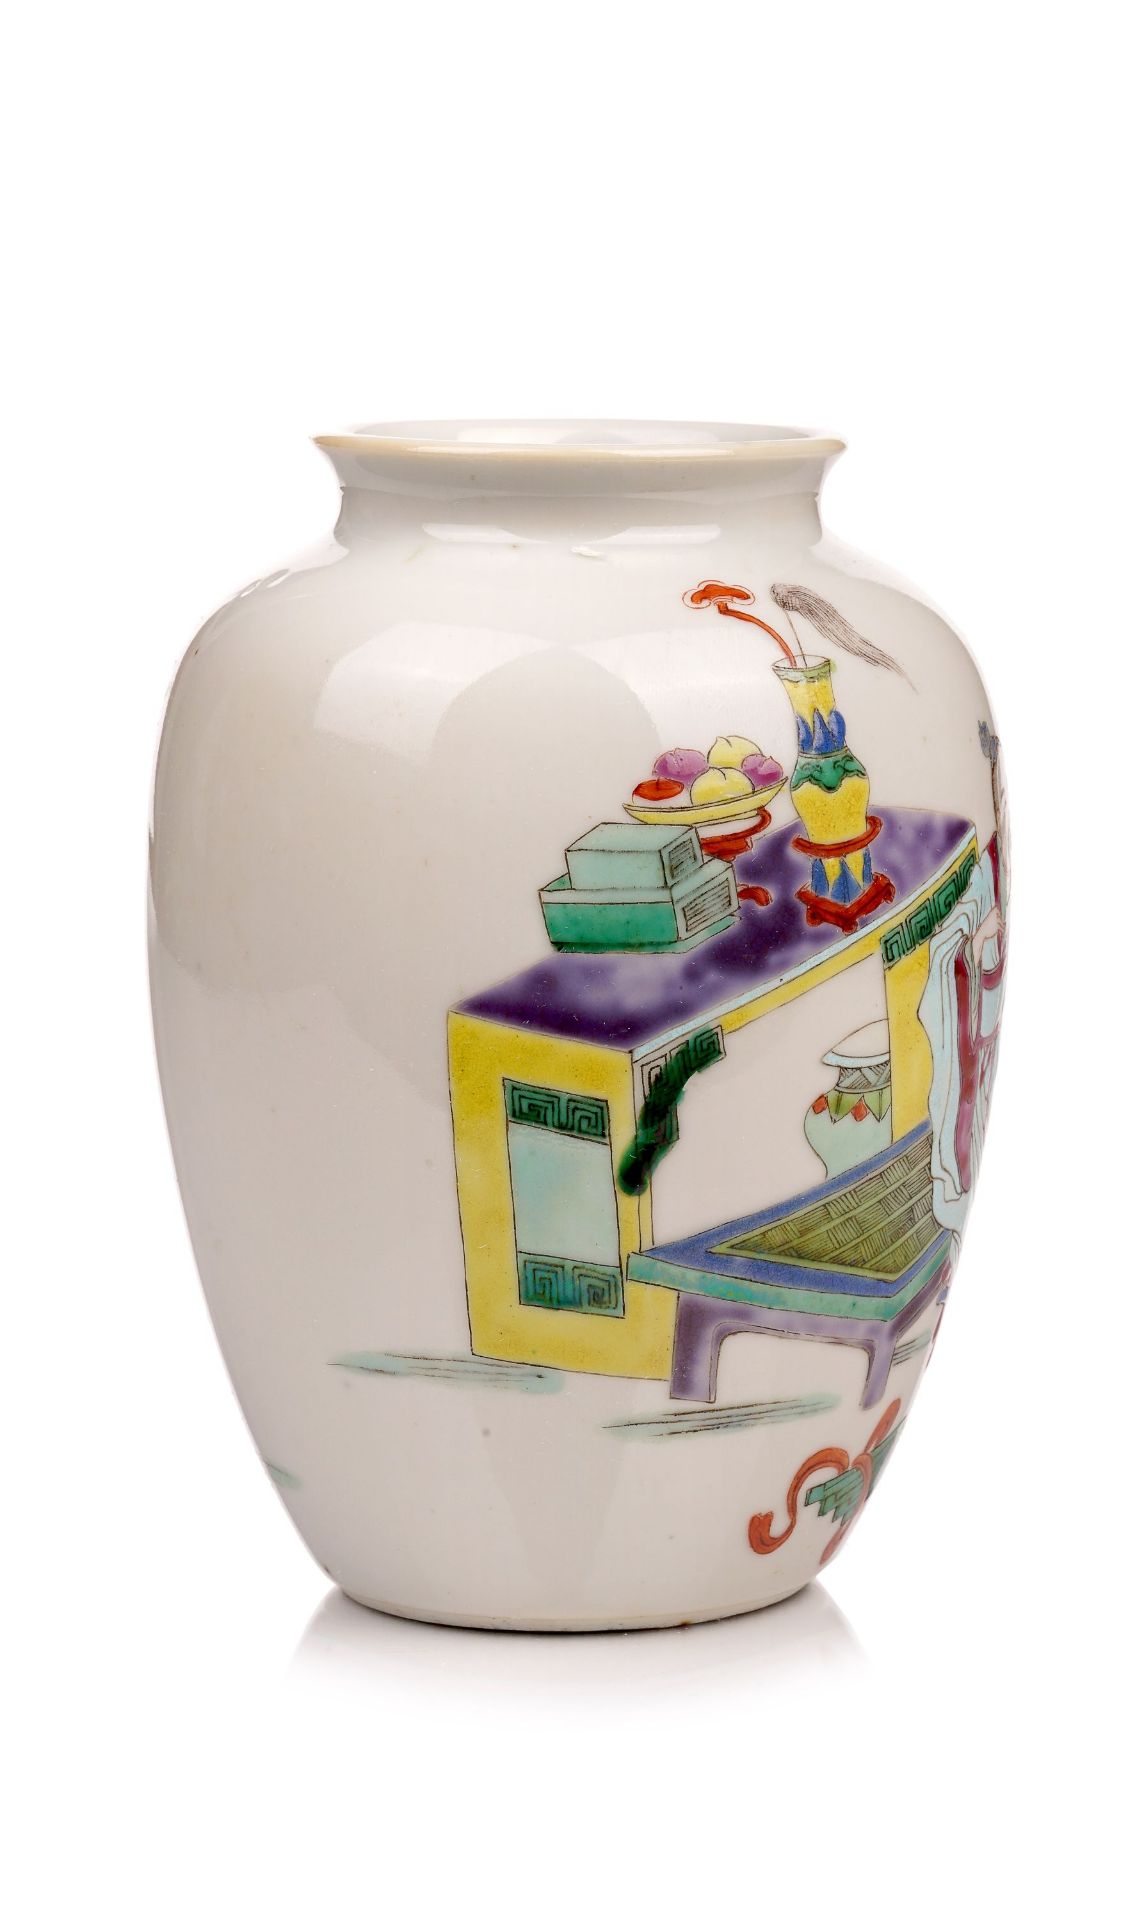 Balustervase im Wucai-Stil. China. Qing-Dynastie, wohl spätes 19. / frühes 20. Jh. - Image 3 of 3